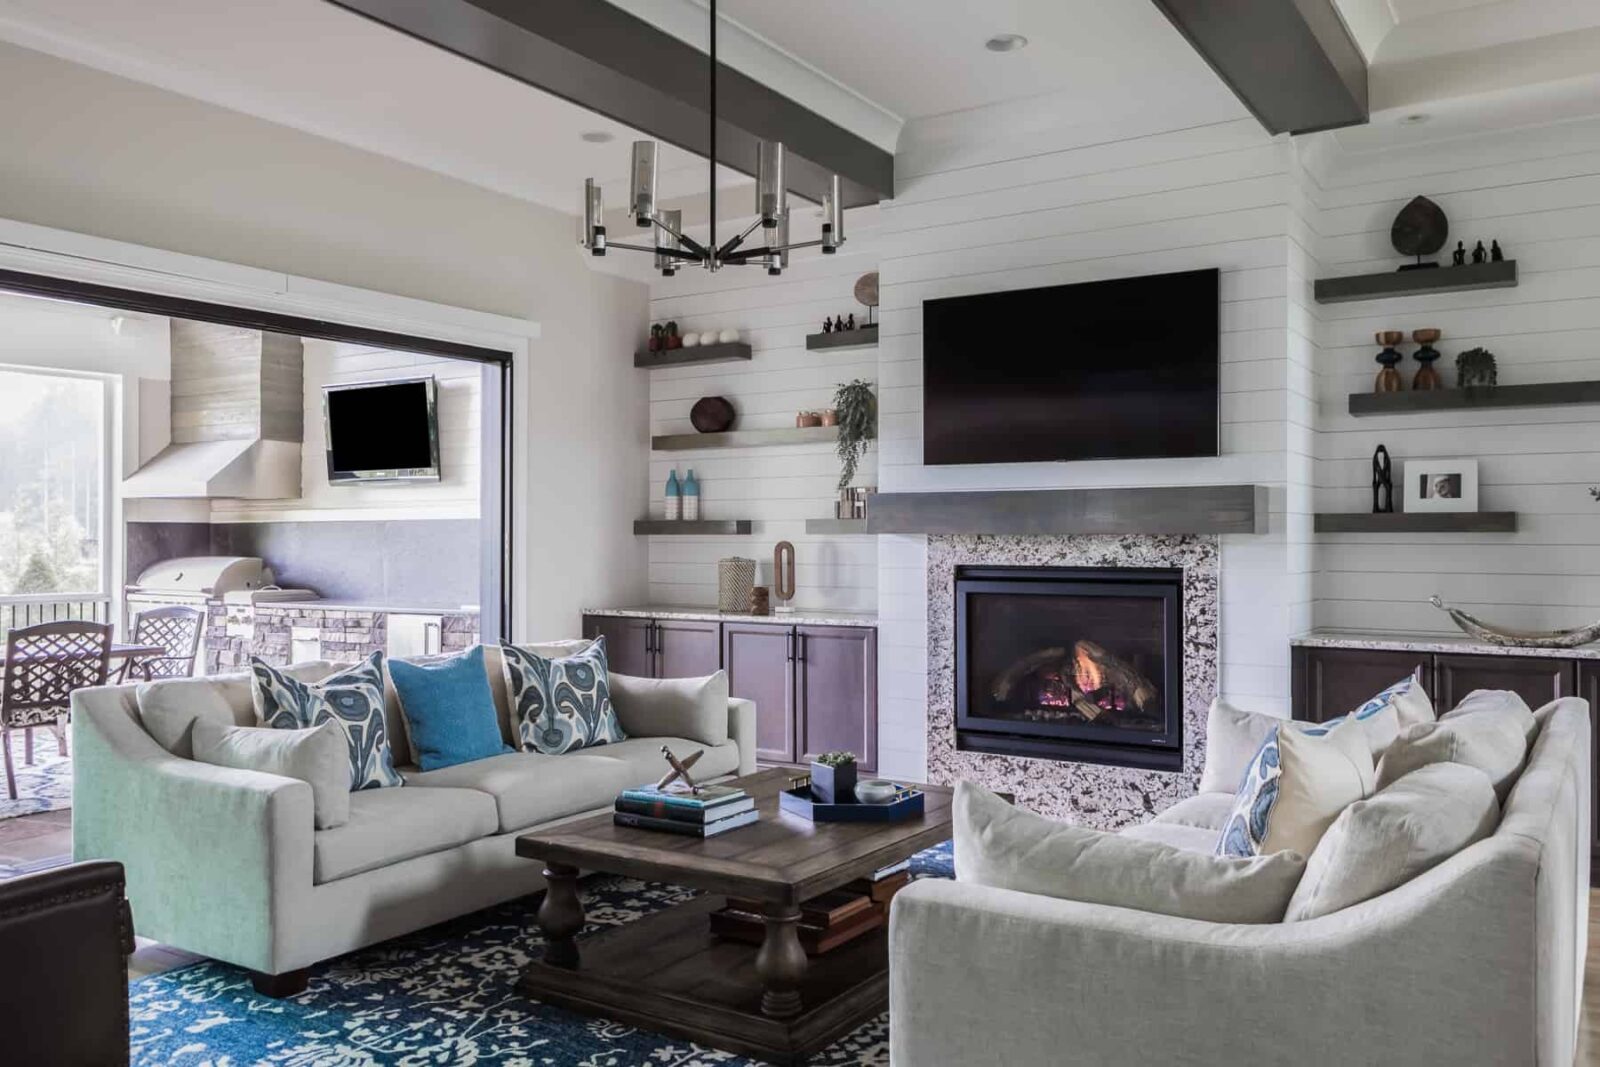 family room floating shelves sofa pillows fireplace built-ins blue patterned rug